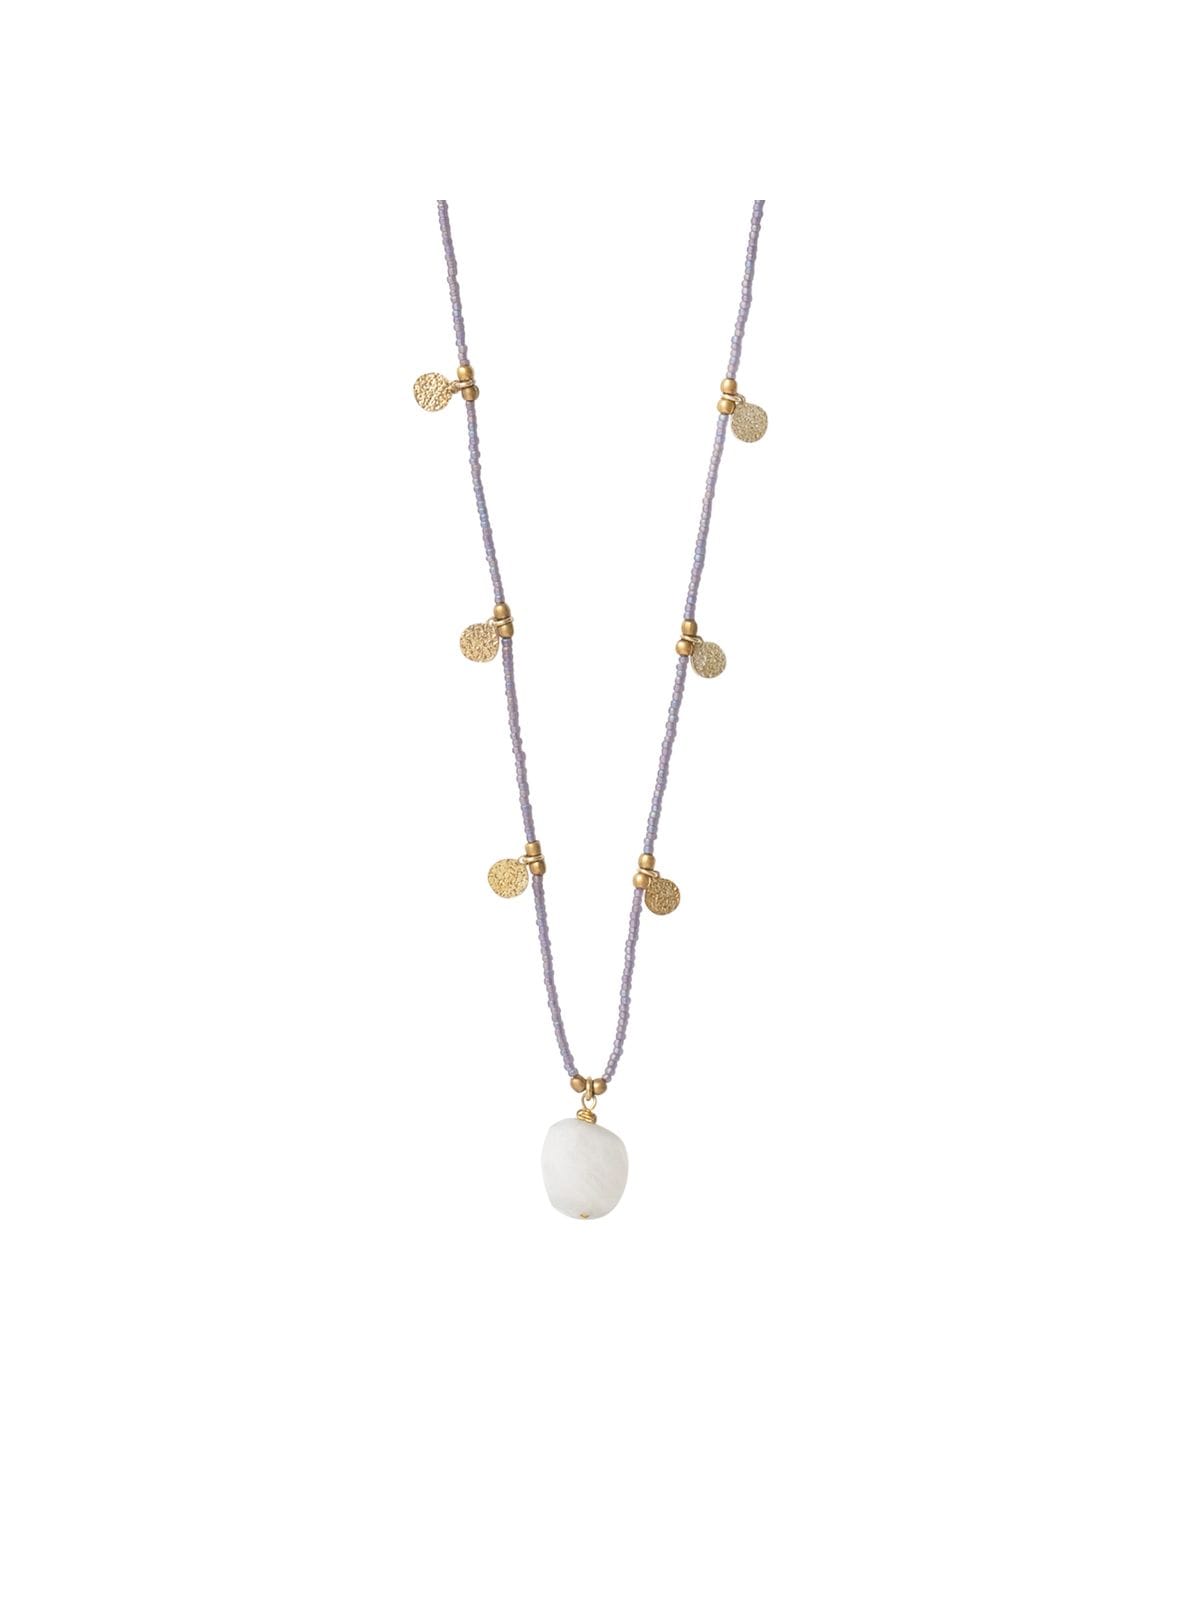 BL25414 - Charming Moonstone Gold Necklace_1200x1600